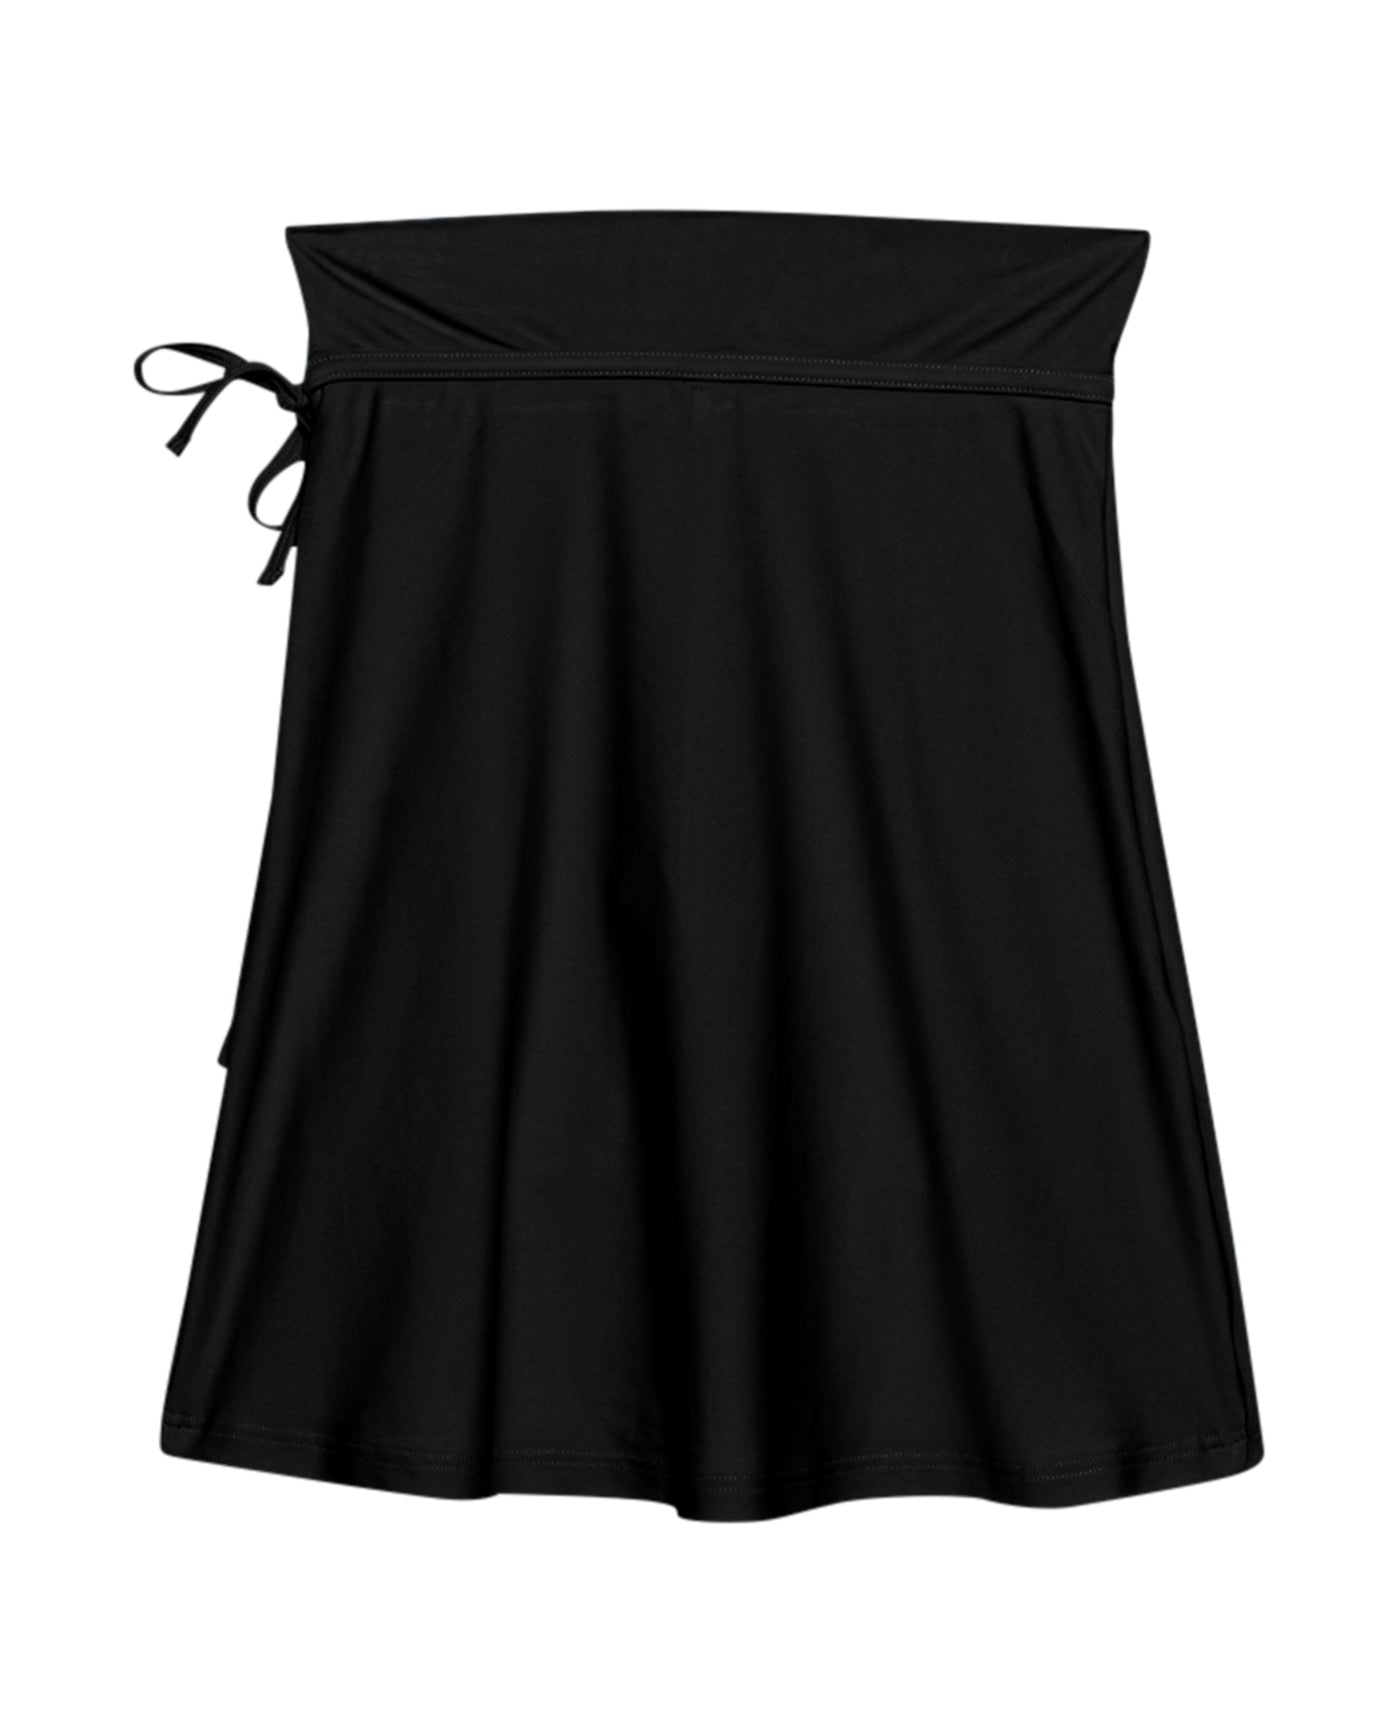 Back View Of Gottex Kids Solid Midi Skirt Cover Up With Built In Pant | GOTTEX KIDS BLACK